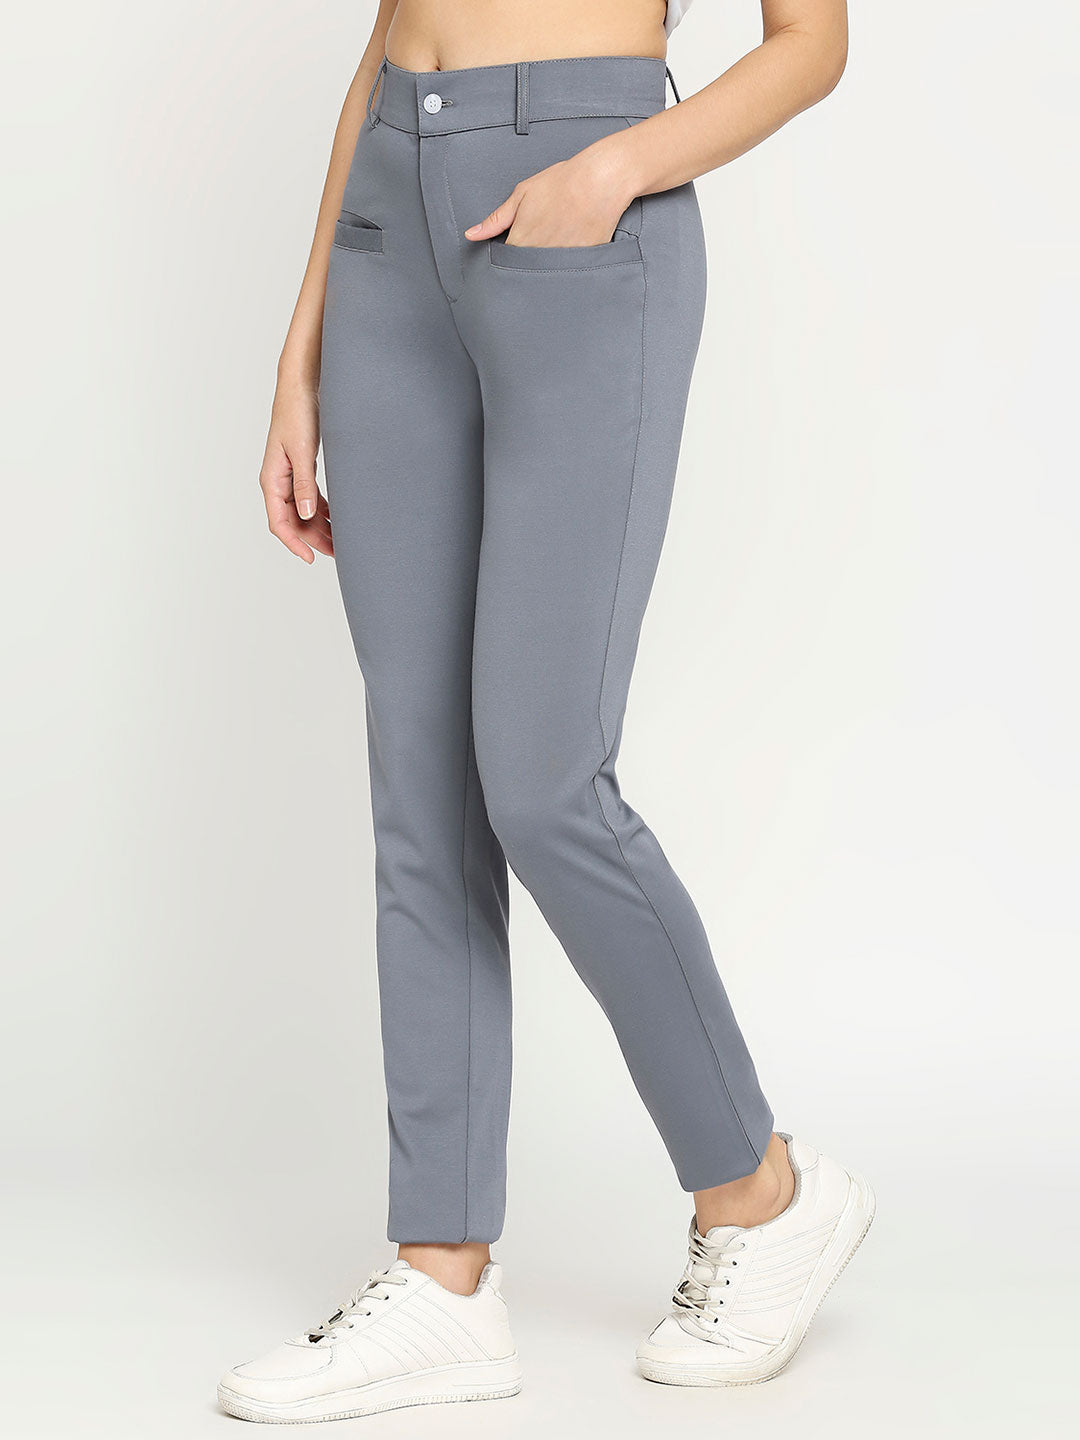 Women's Grey Golf Pants with Welt Pockets - Stylish and Comfortable